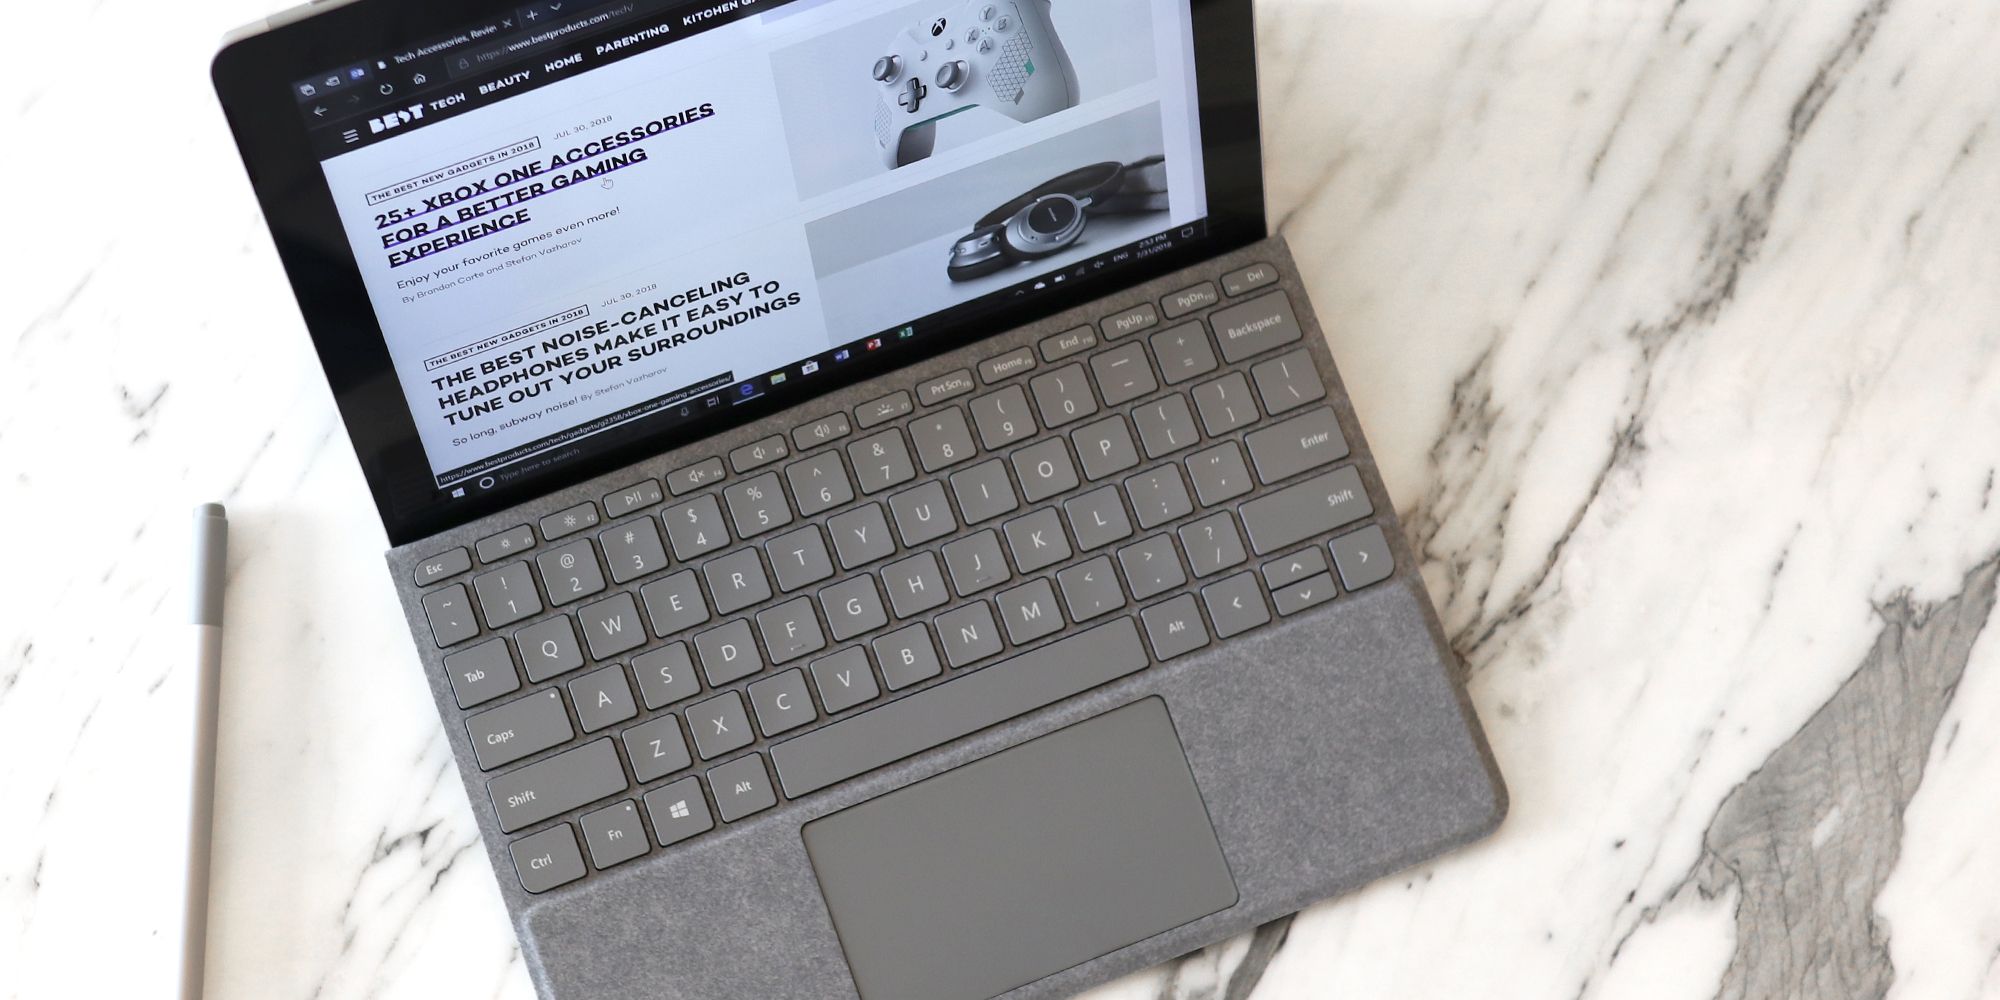 Microsoft Surface Go Review: A Stylish and Compact 2-in-1 Tablet